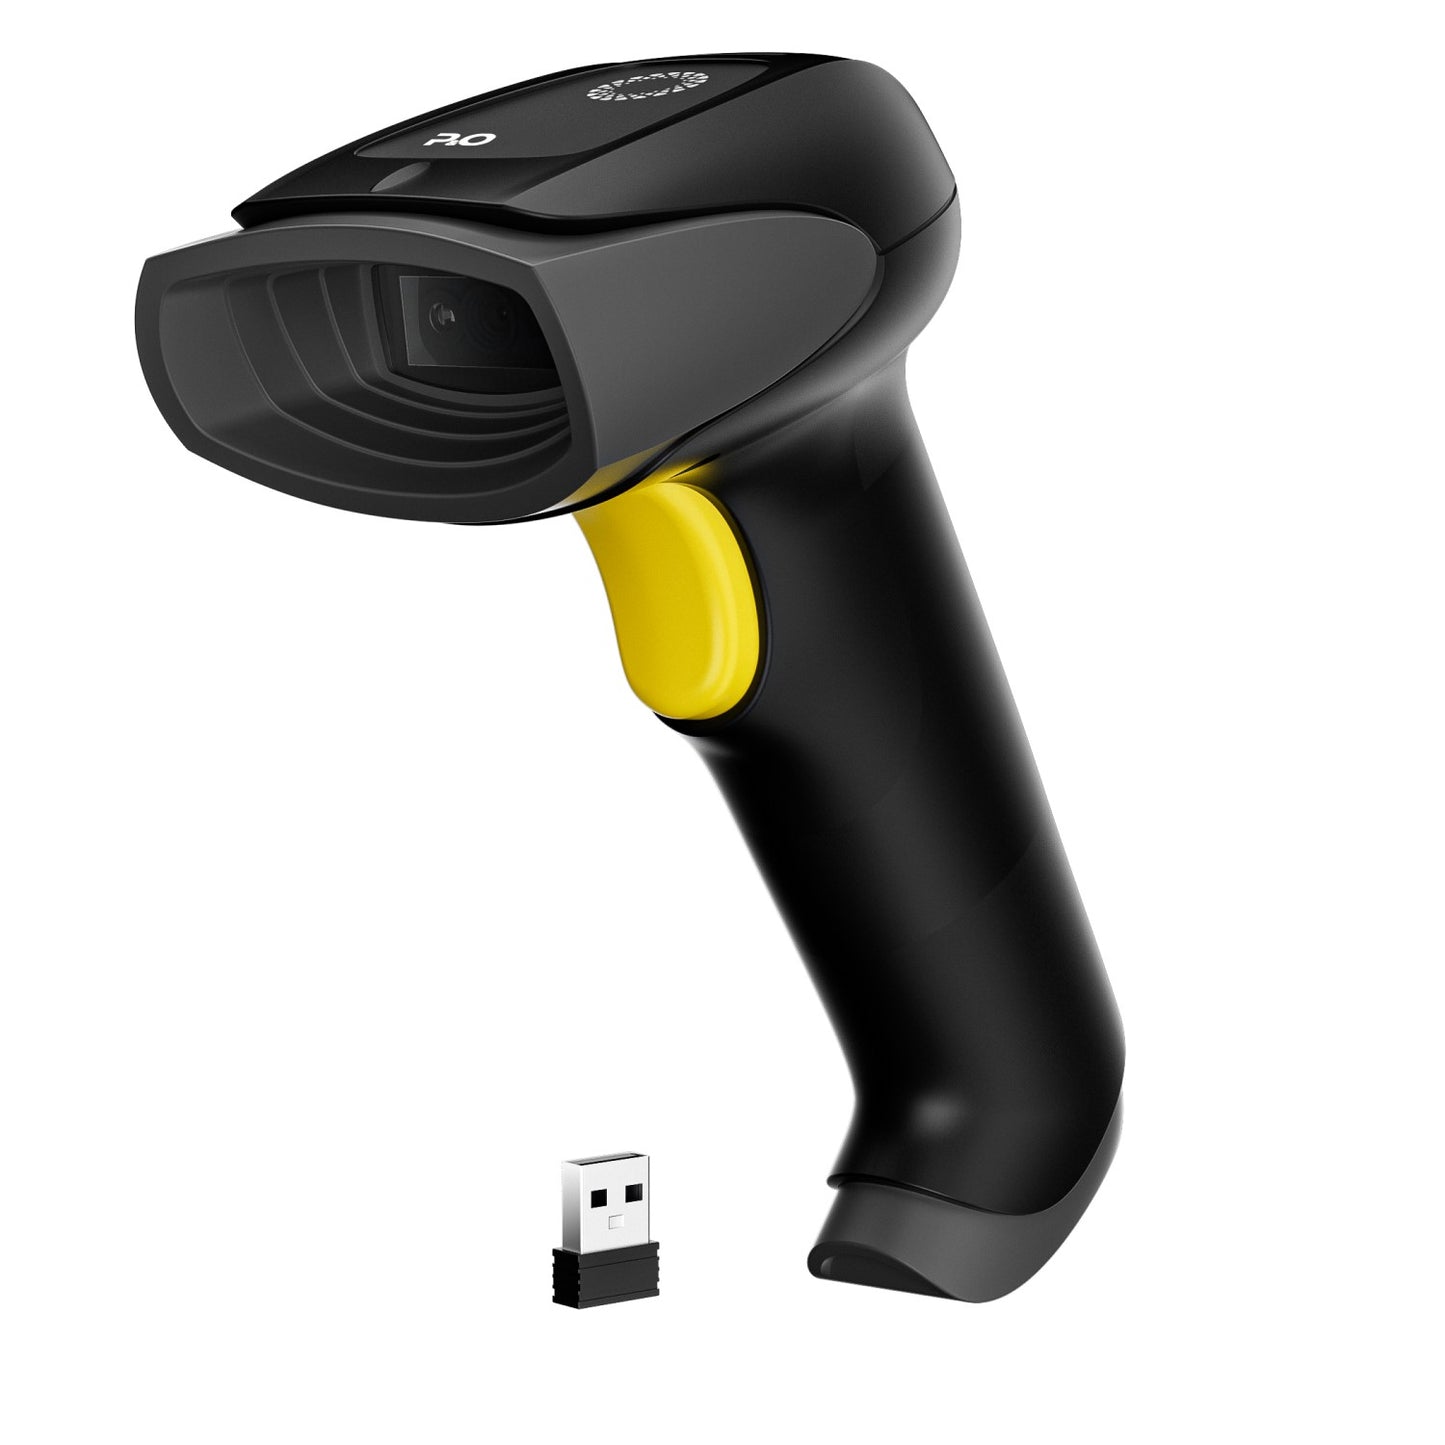 BS144, wireless barcode scanner, portable barcode scanner, barcode scanner, lector de códigos de barras inalámbrico, bluetooth barcode scanner, lector de códigos de barras bluetooth, industria, logística, varejo, retail